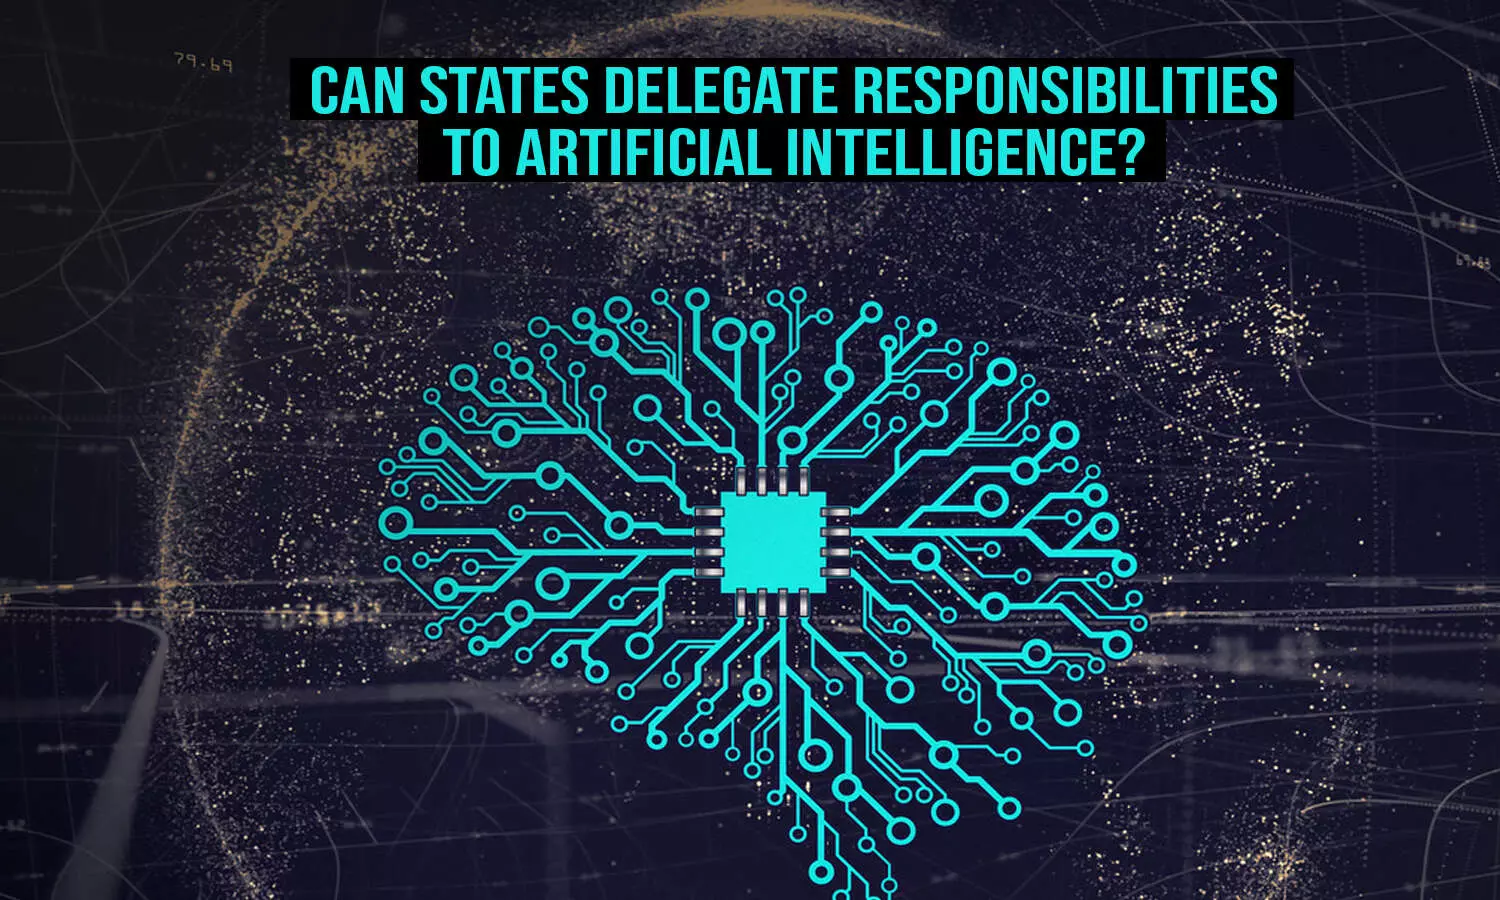 Can States Delegate Responsibilities to Artificial Intelligence?